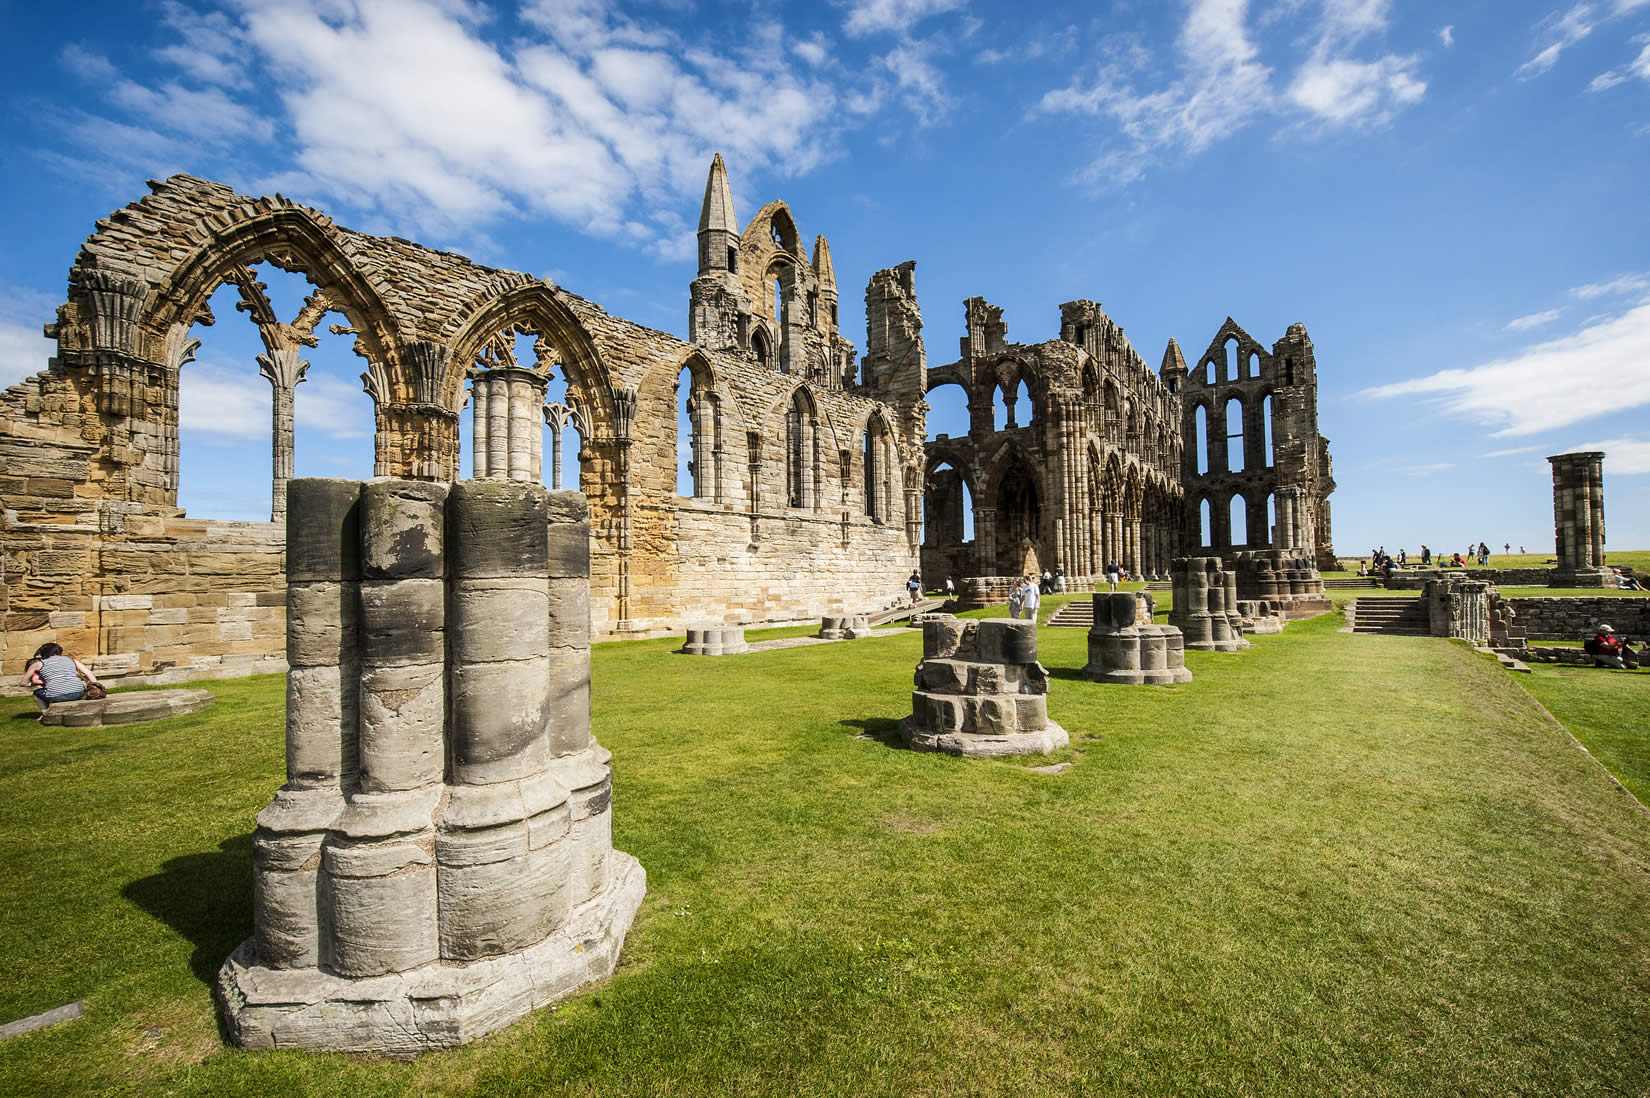 Image name Whitby Abbey the 5 image from the post Whitby Abbey in Yorkshire.com.